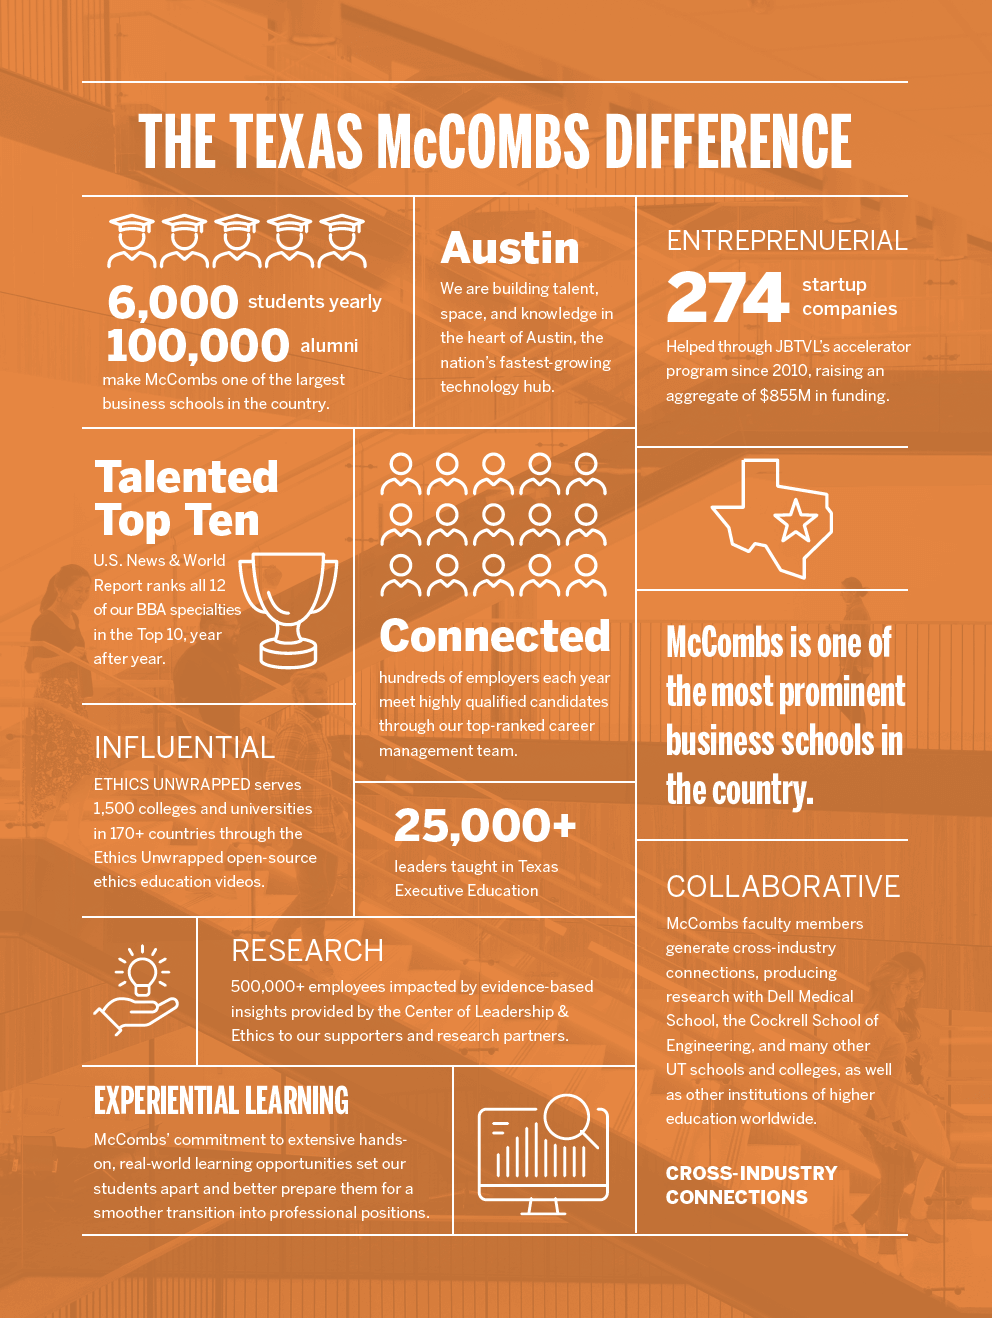 Orange and white infographic detailing McCombs differentiators